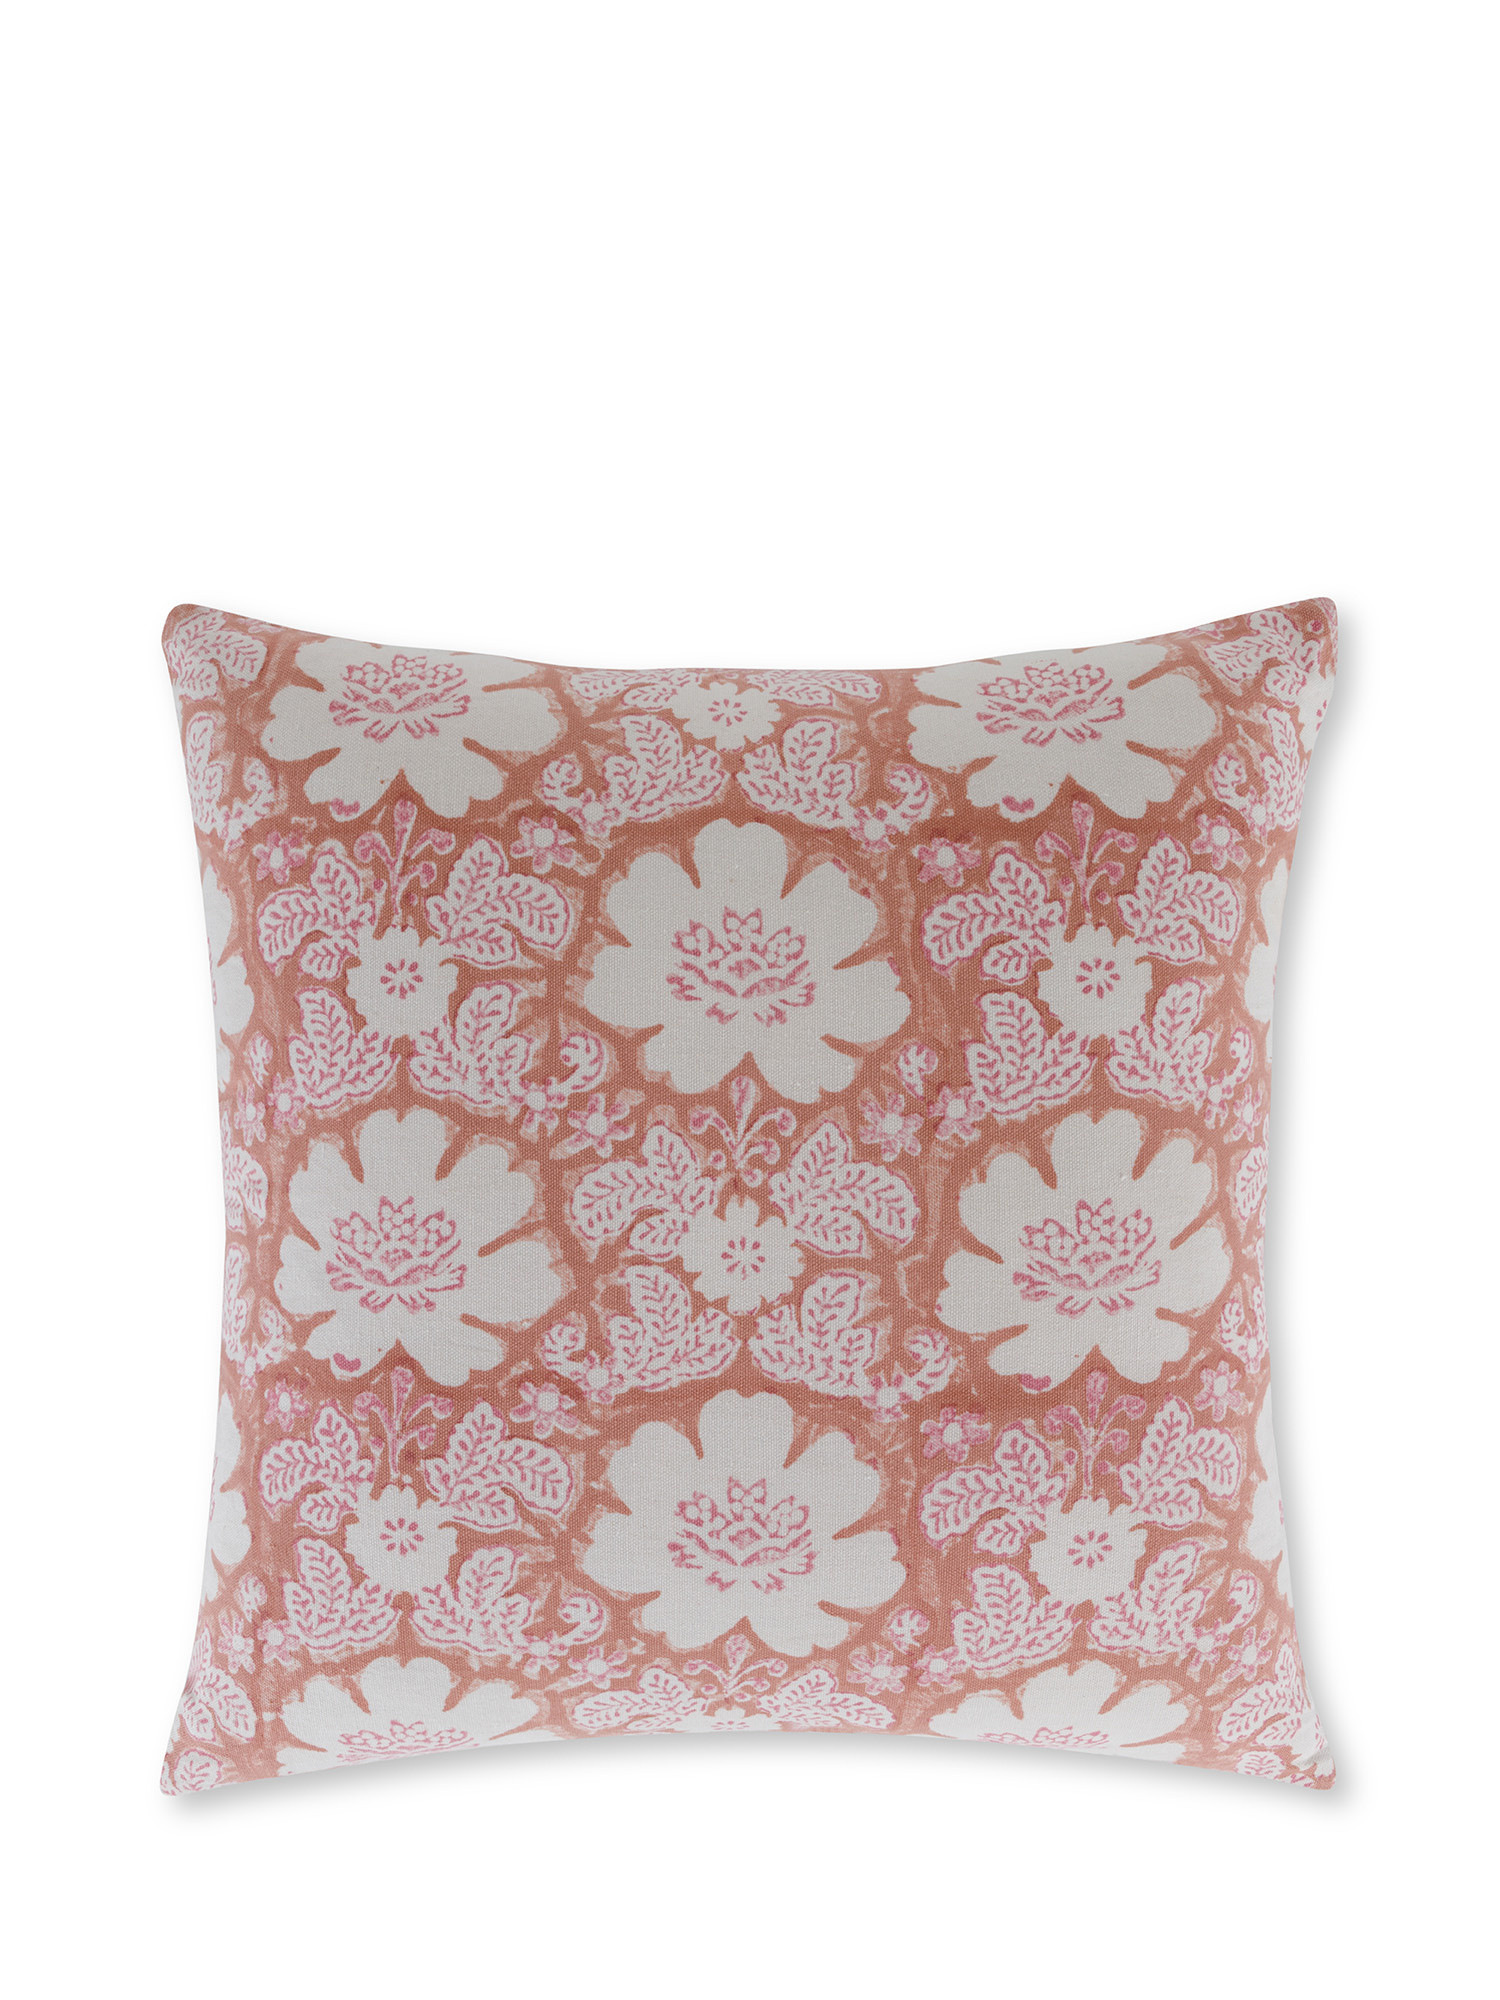 Cushion with flower print 45x45 cm, Pink, large image number 1